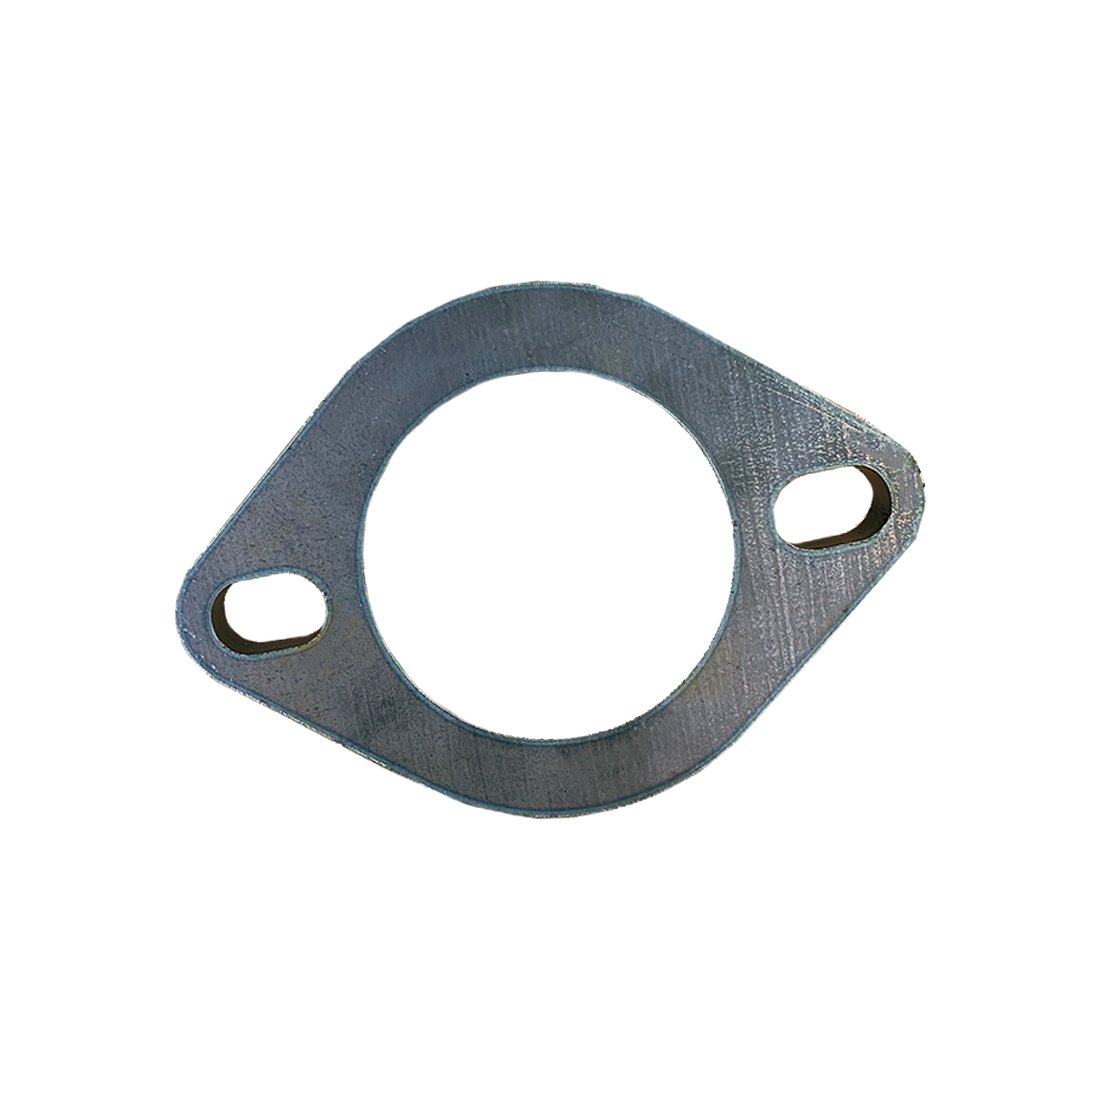 Ford Falcon Style 2 Bolt 2.5" Exhaust Flange Plate - Mild Steel image